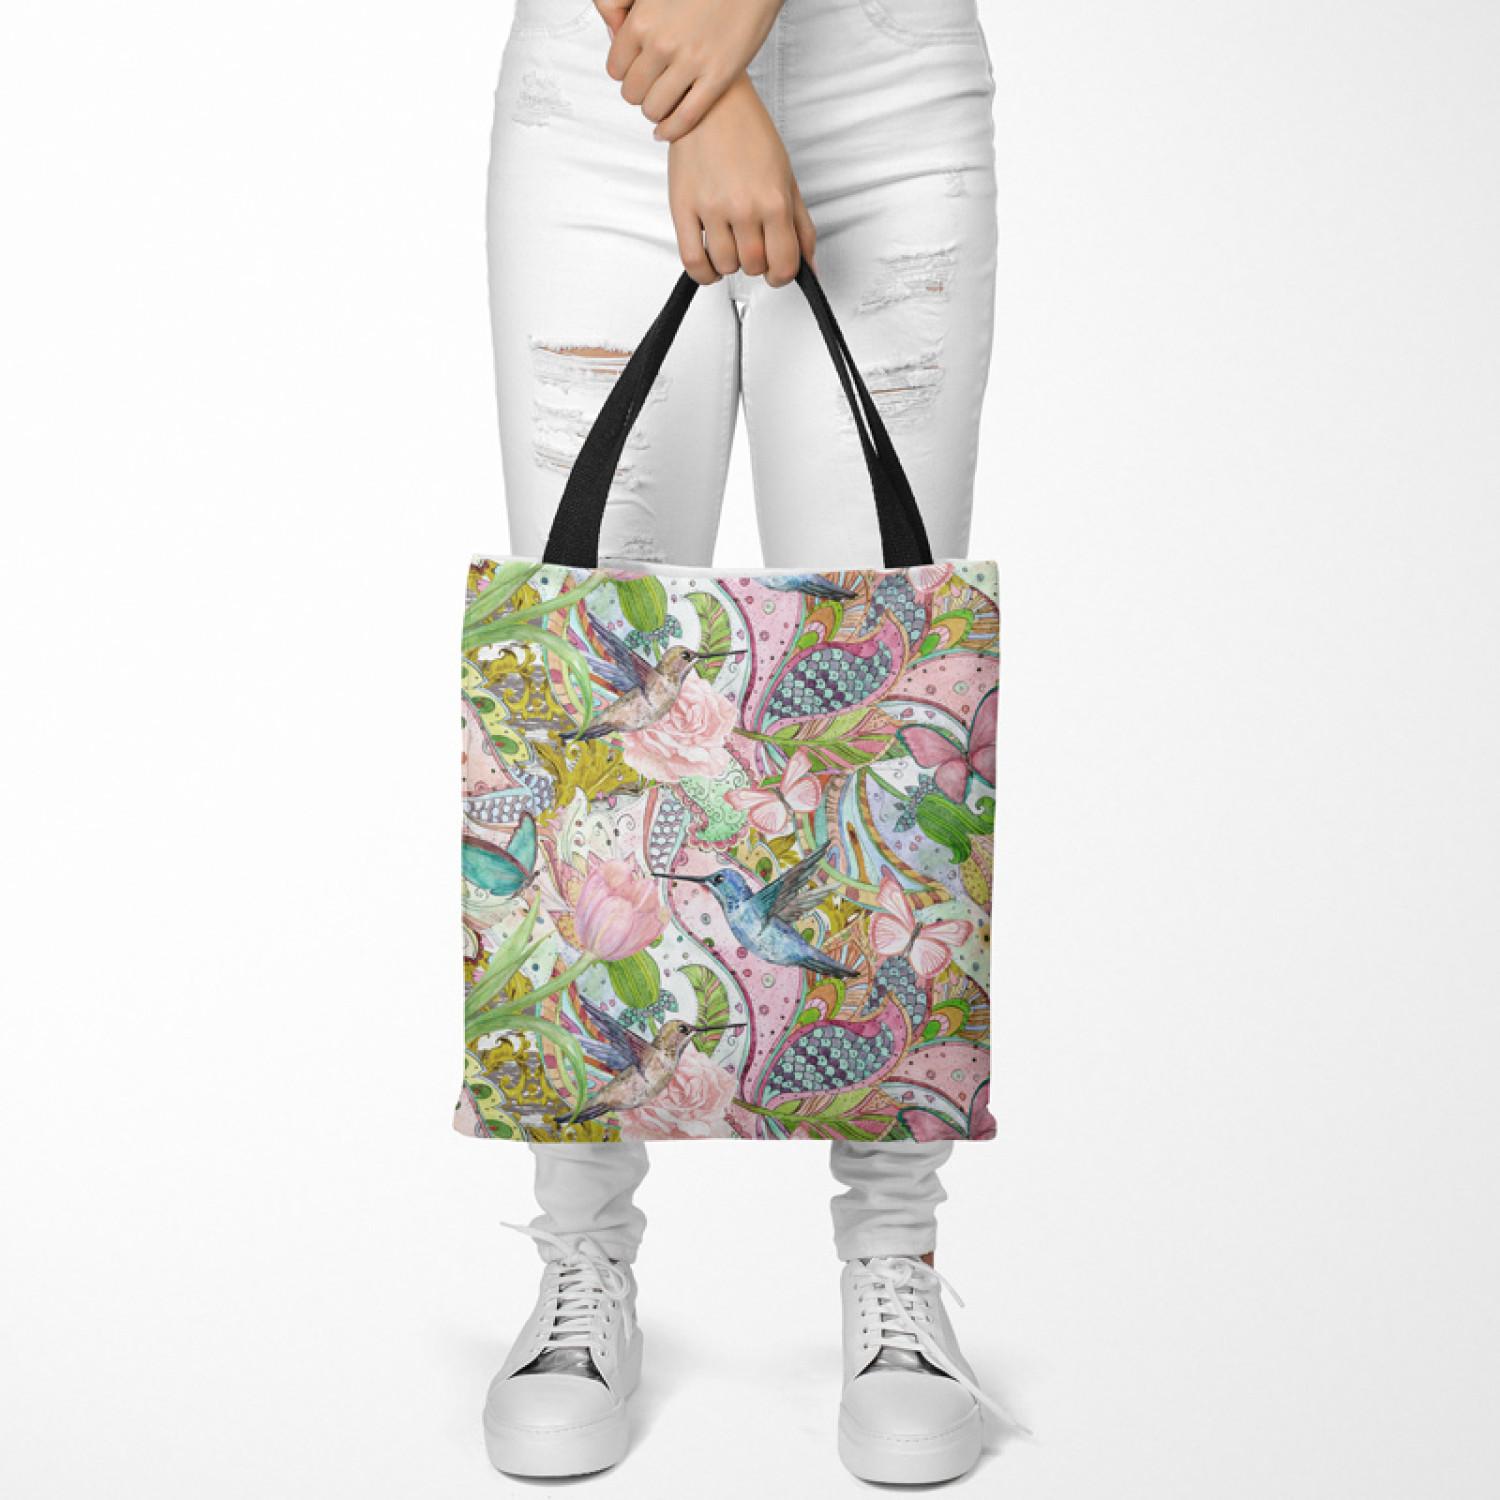 Bolsa de mujer Spring and hummingbirds - ornamental floral pattern with exotic birds